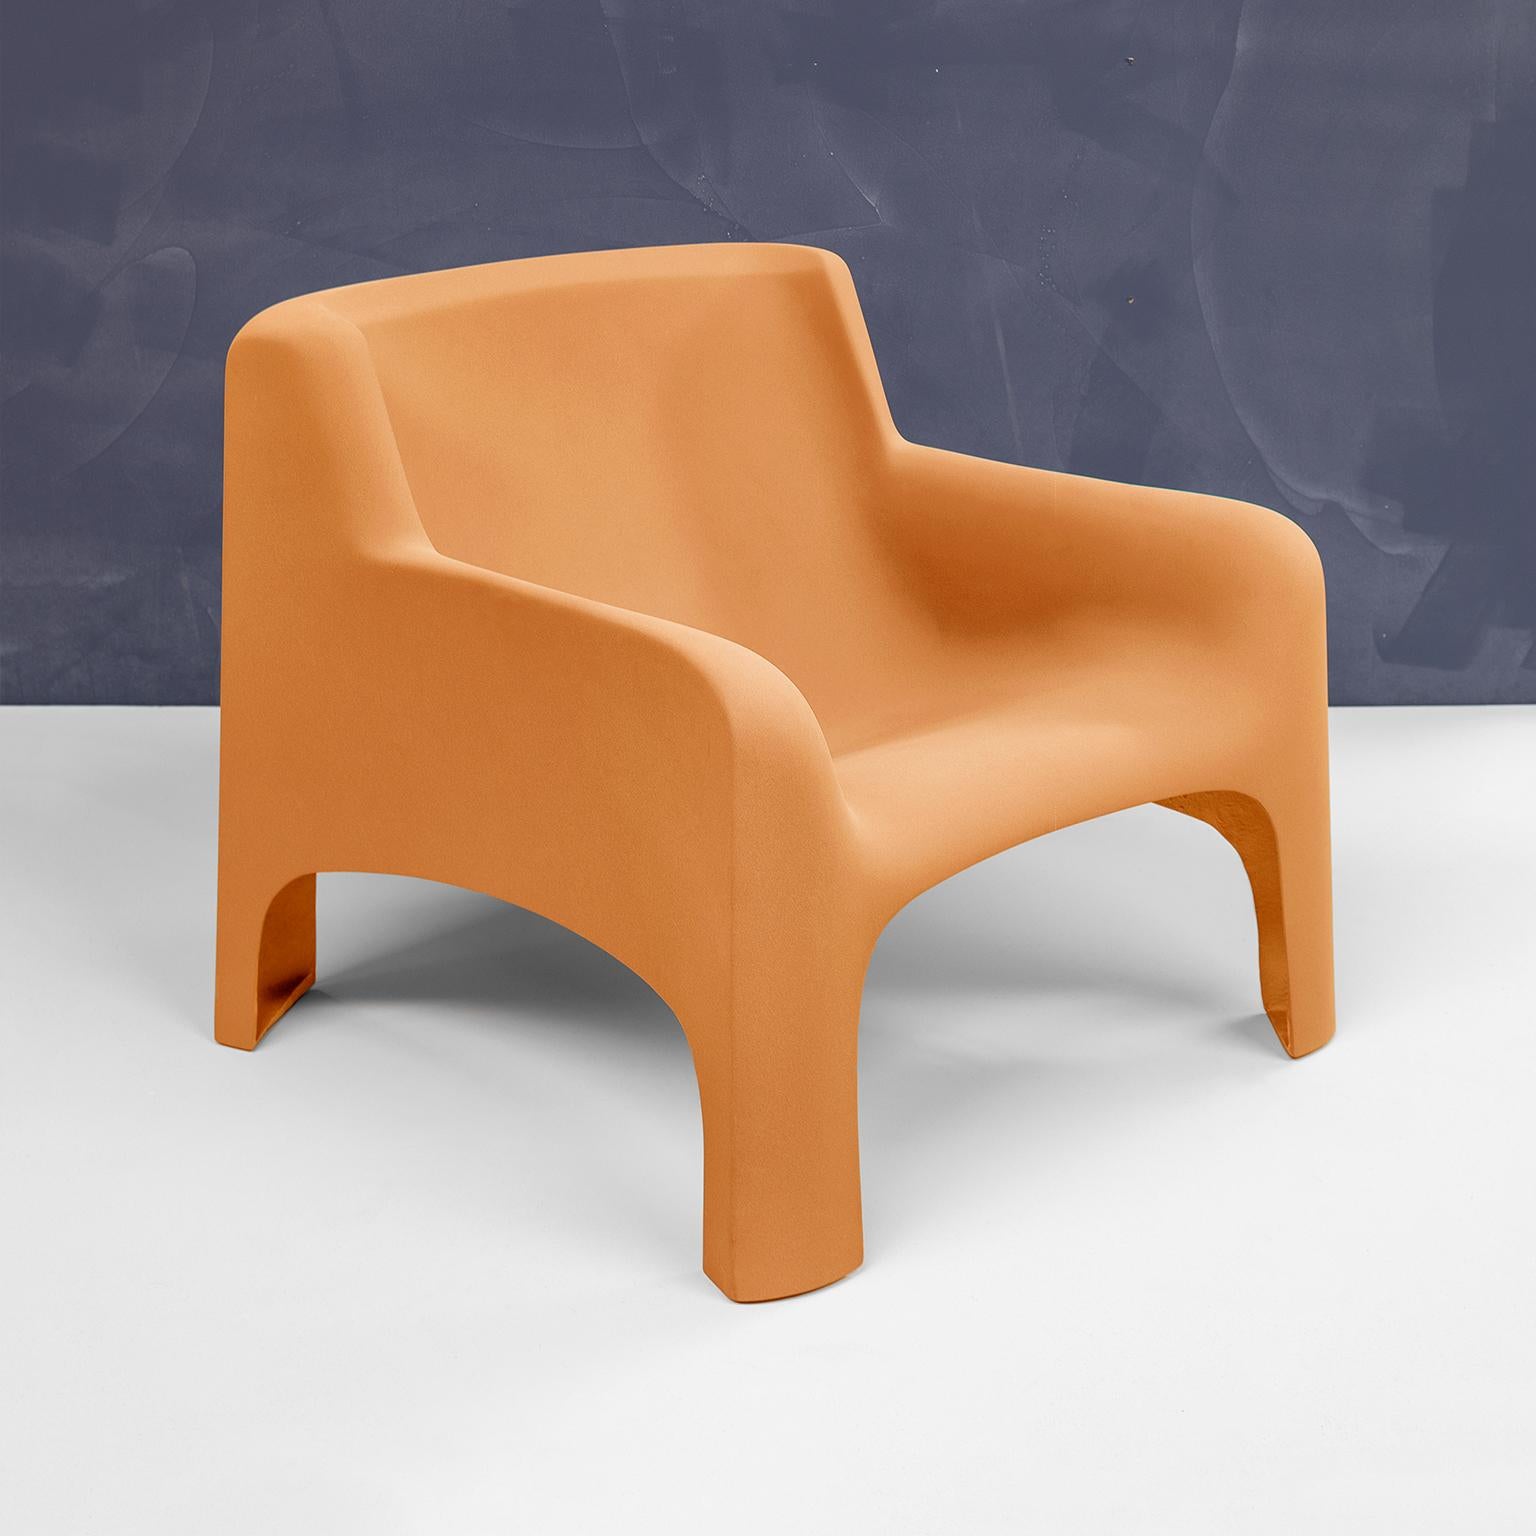 Transparency matters collection by Draga&Aurel:

Armchair, in fiberglass, production by Arflex, Designer Carlo Bartoli, 1960-1969.
Vintage piece has been transformed in to a contemporary item with matte coat.

Color orange. Size cm 78 x 81 x